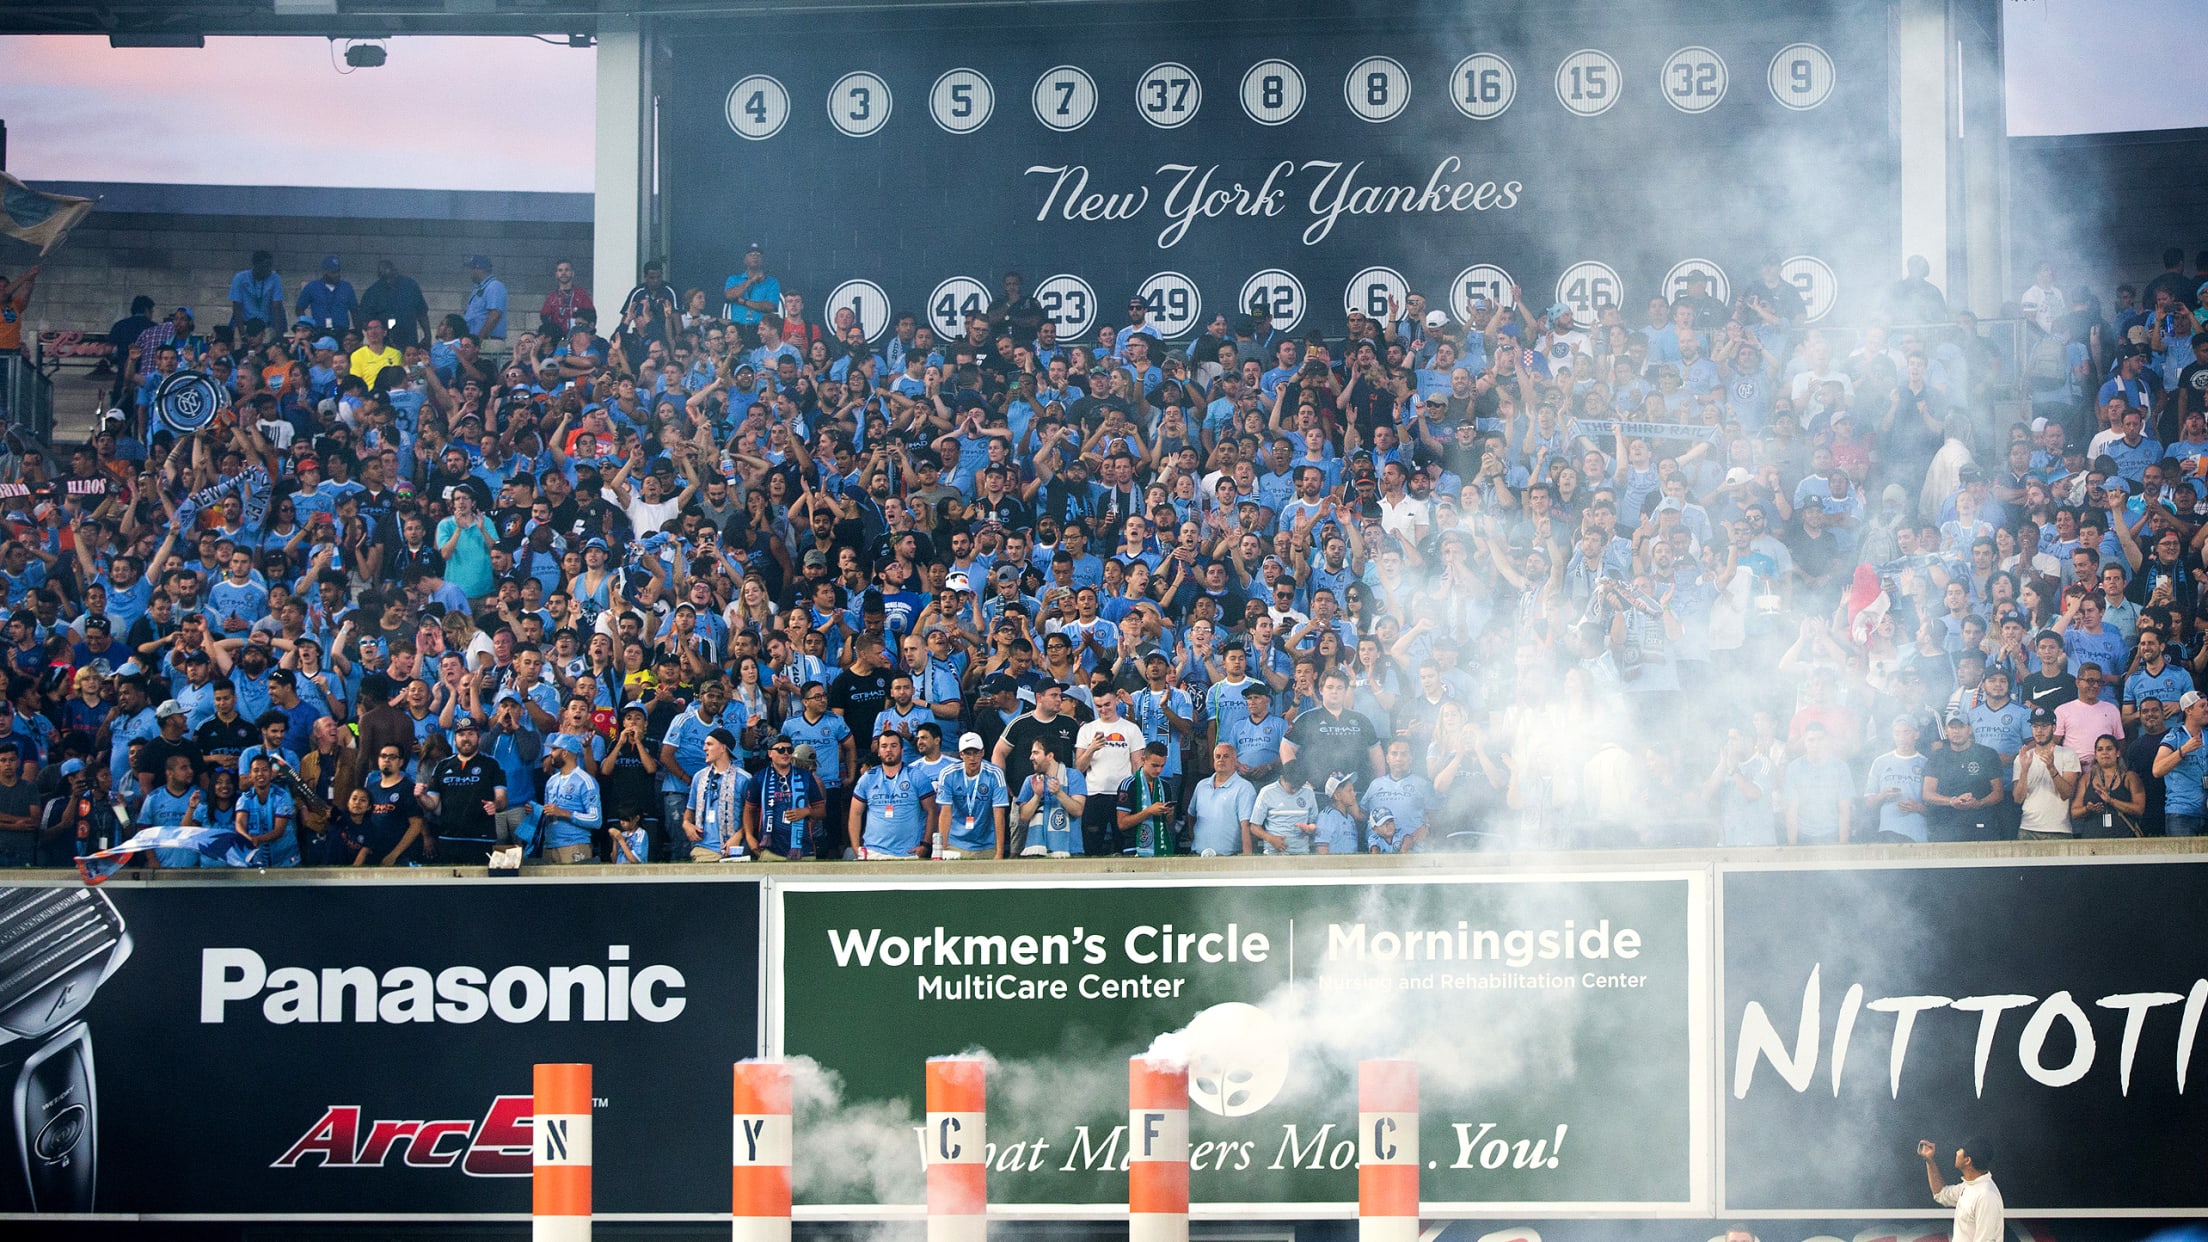 New York City Football Club on X: The last station is Yankee